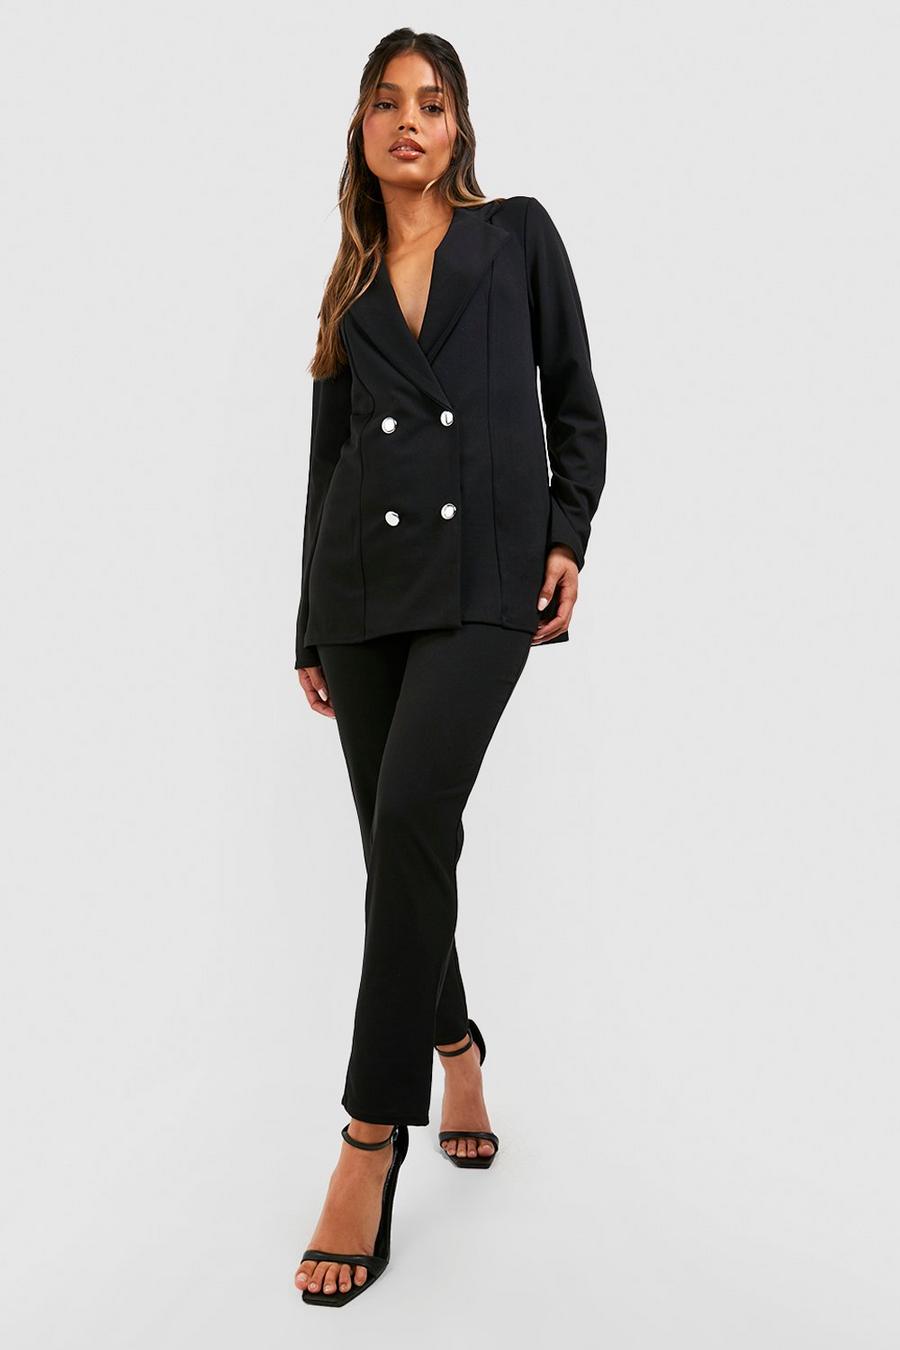 Black schwarz Double Breasted Blazer And Trouser Suit Set